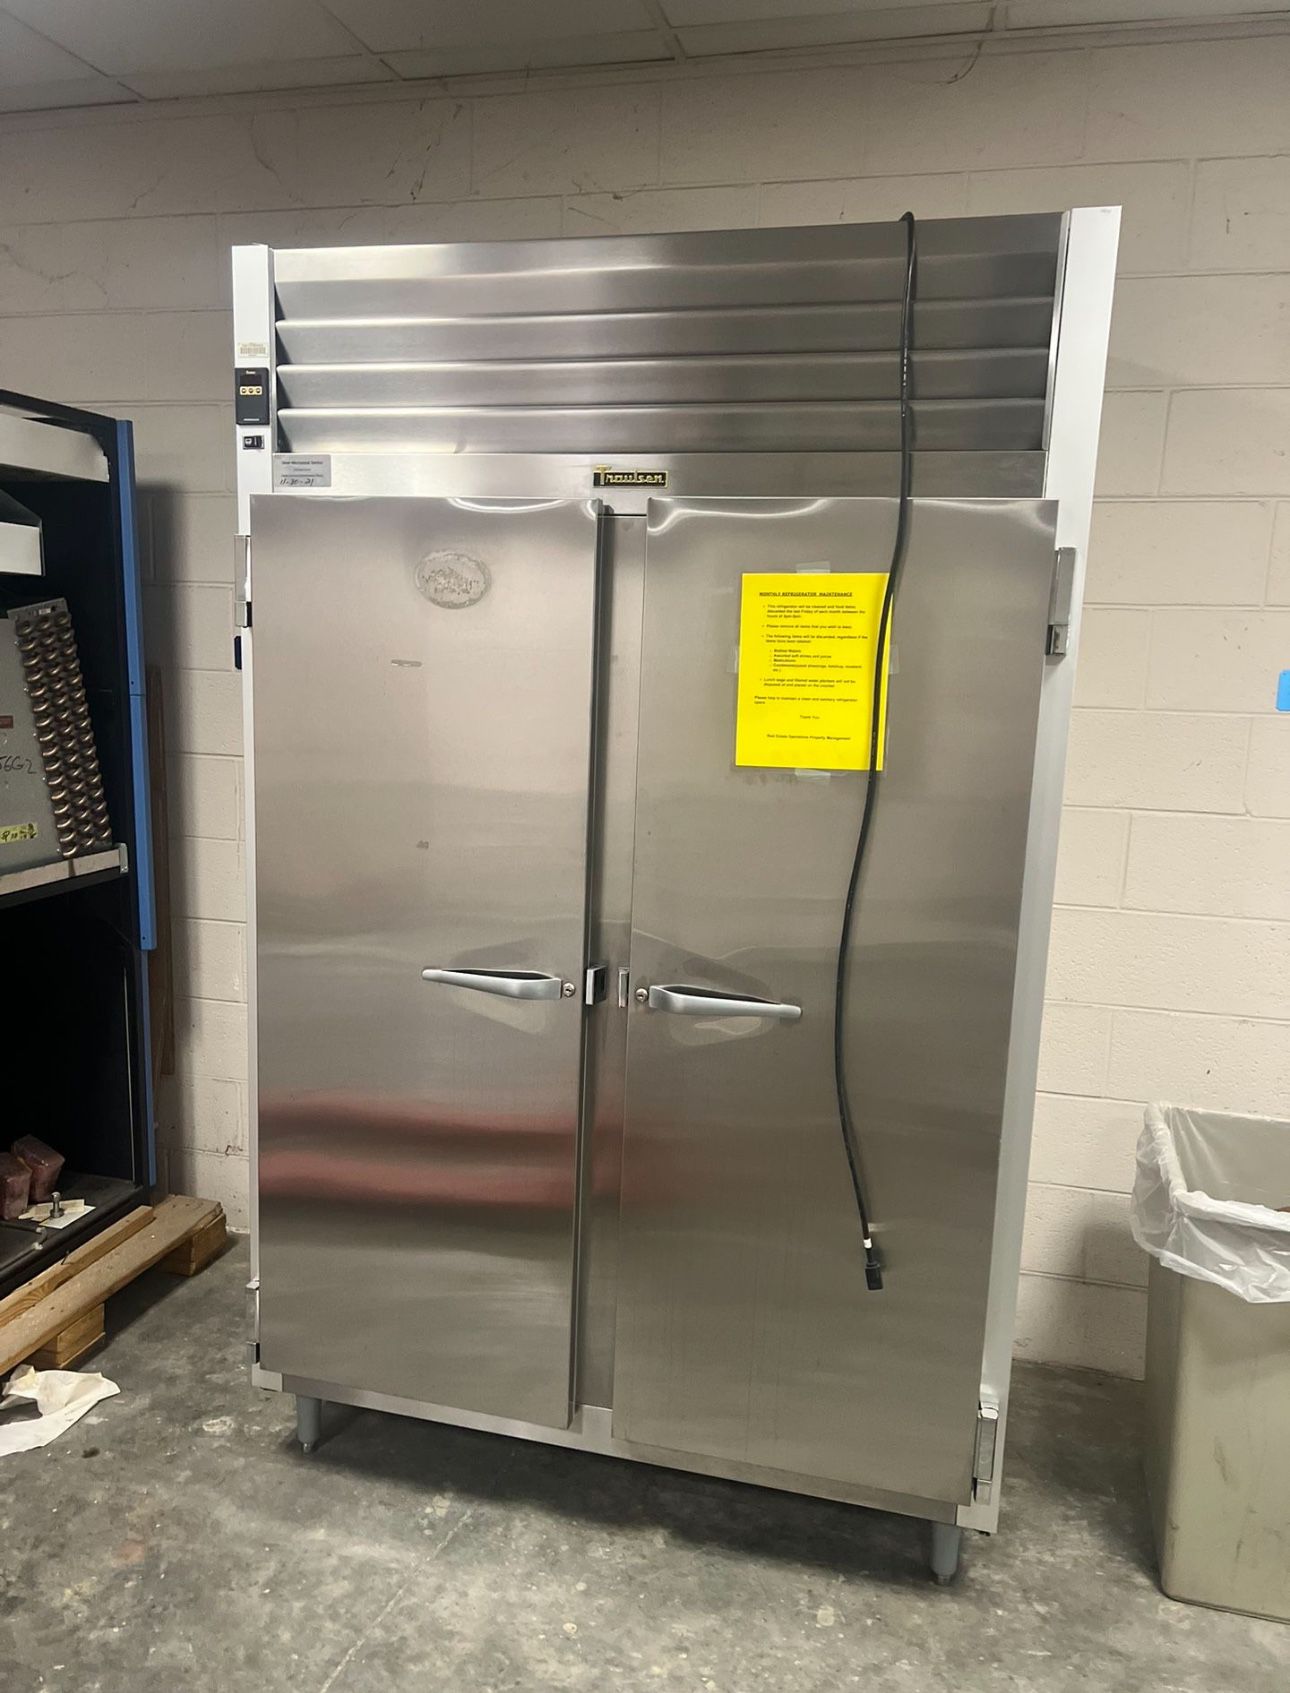 Traulsen G22010 52" G Series two section reach in refrigerator